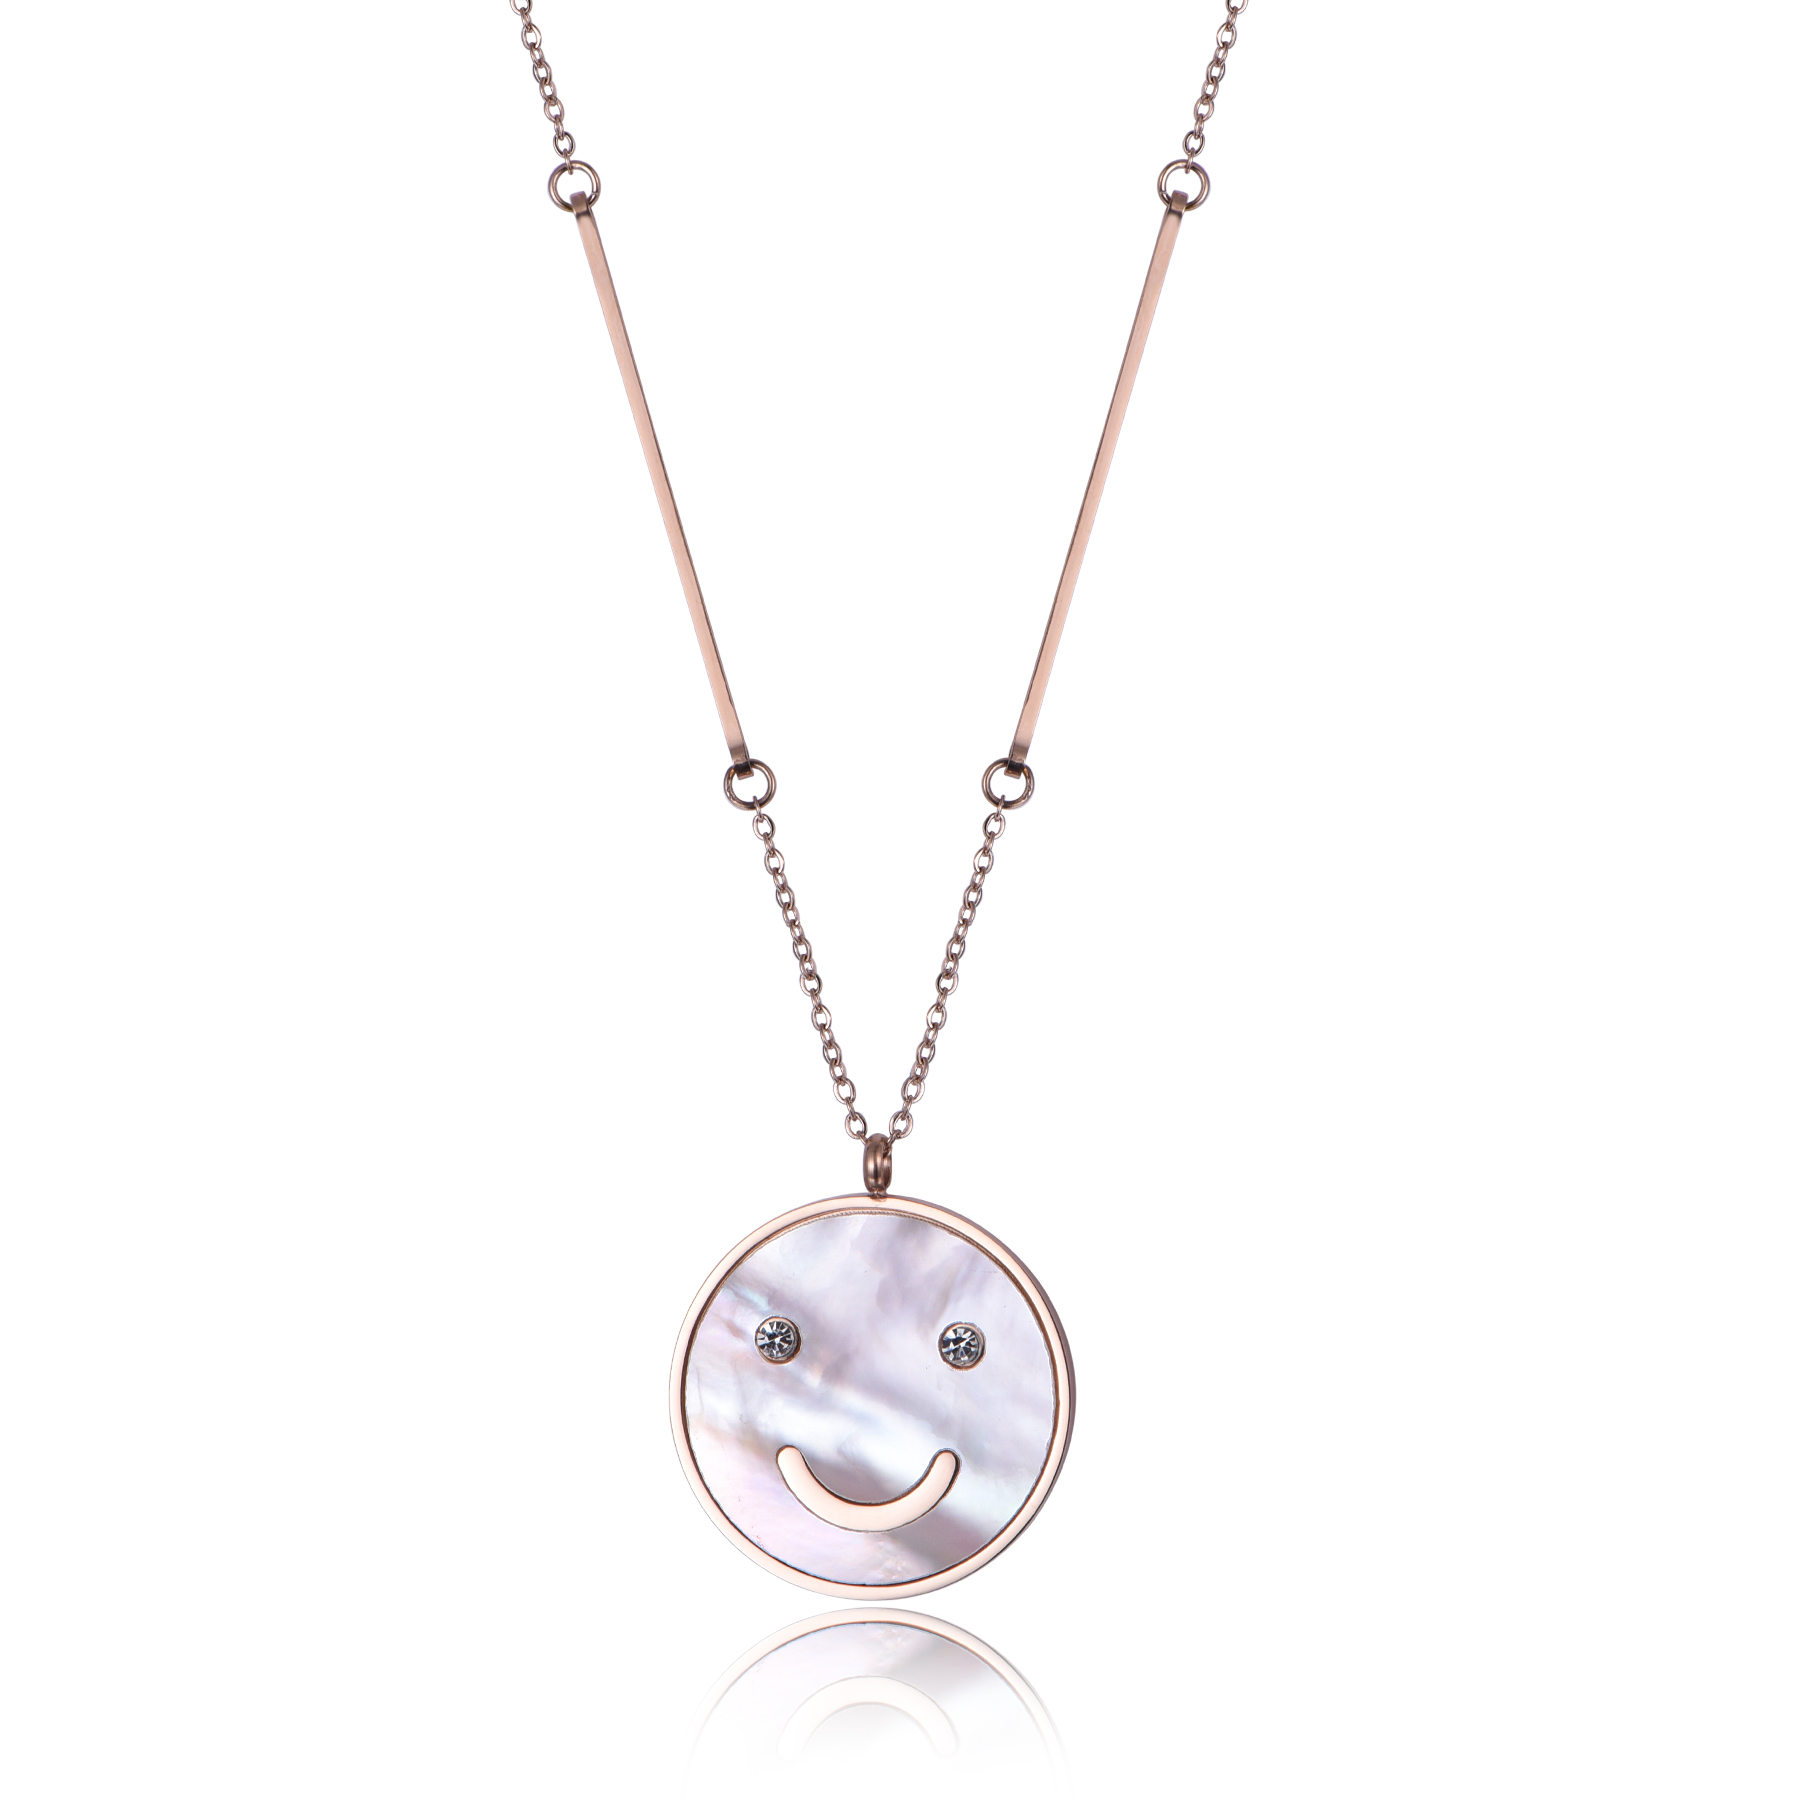 Stainless Steel Shell Laughing Face Necklace For Gift NR7-19